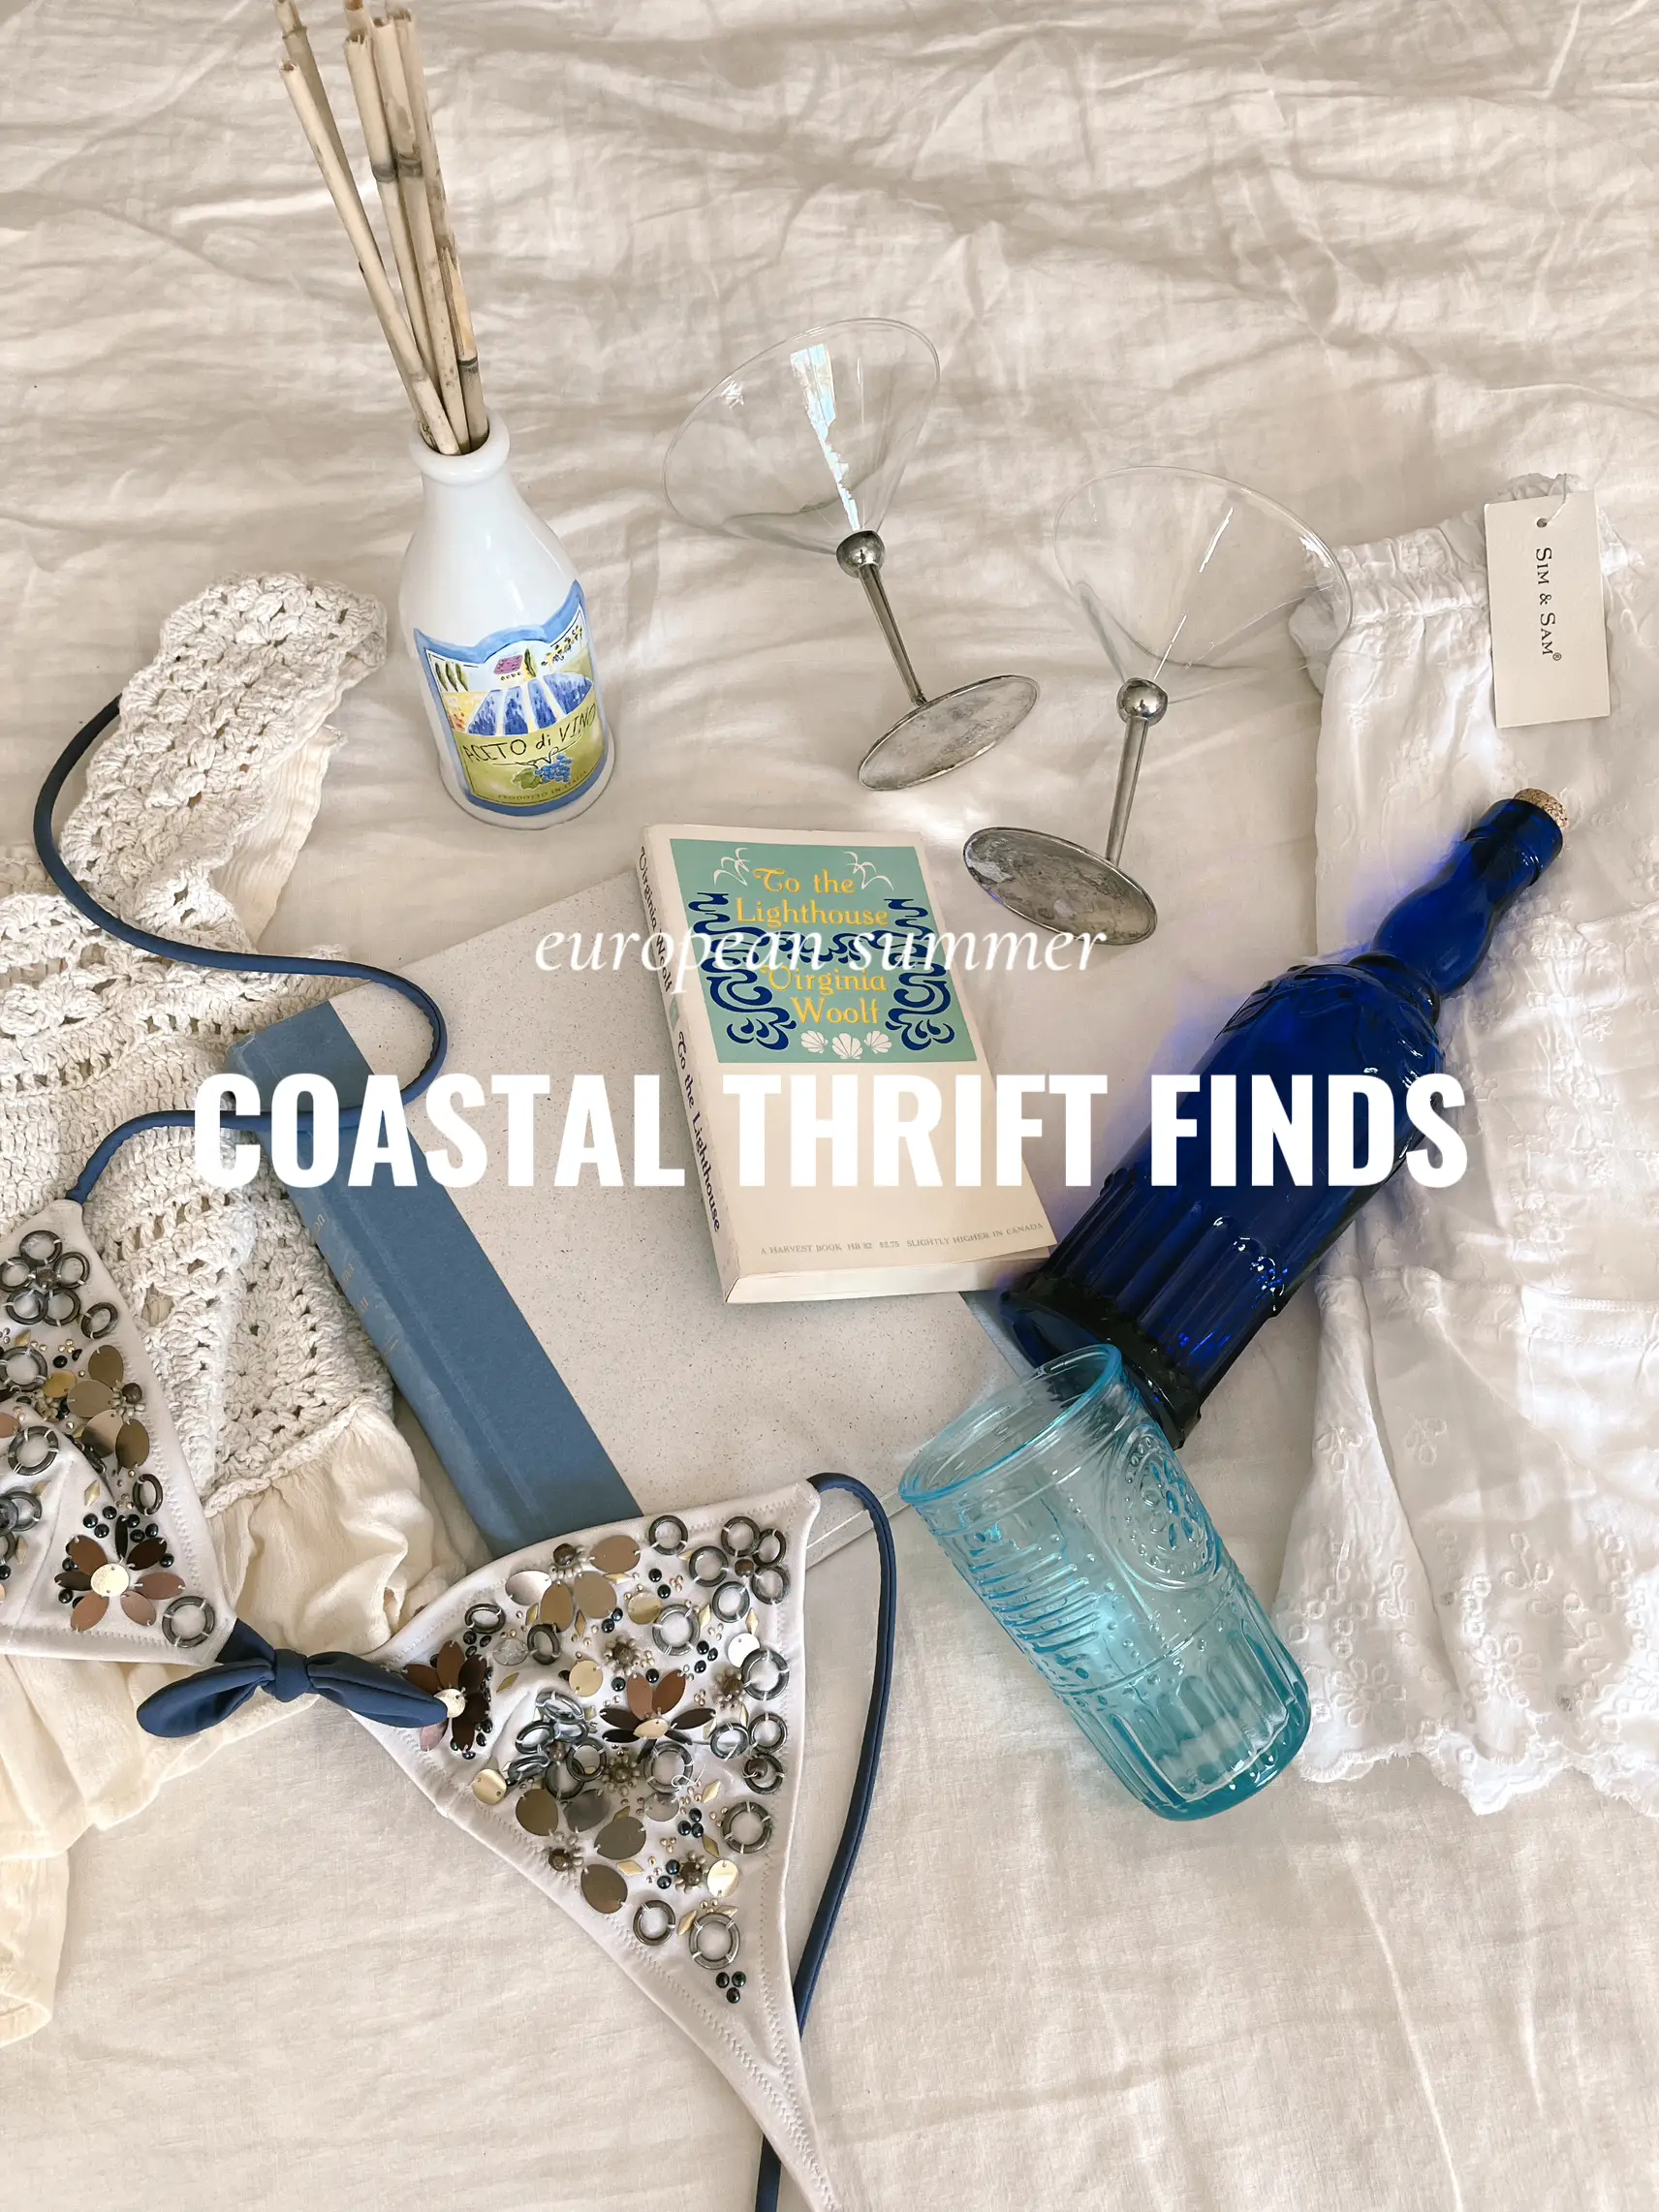  A pile of junk on a beach with a sign that says "Costal Thief Finds".